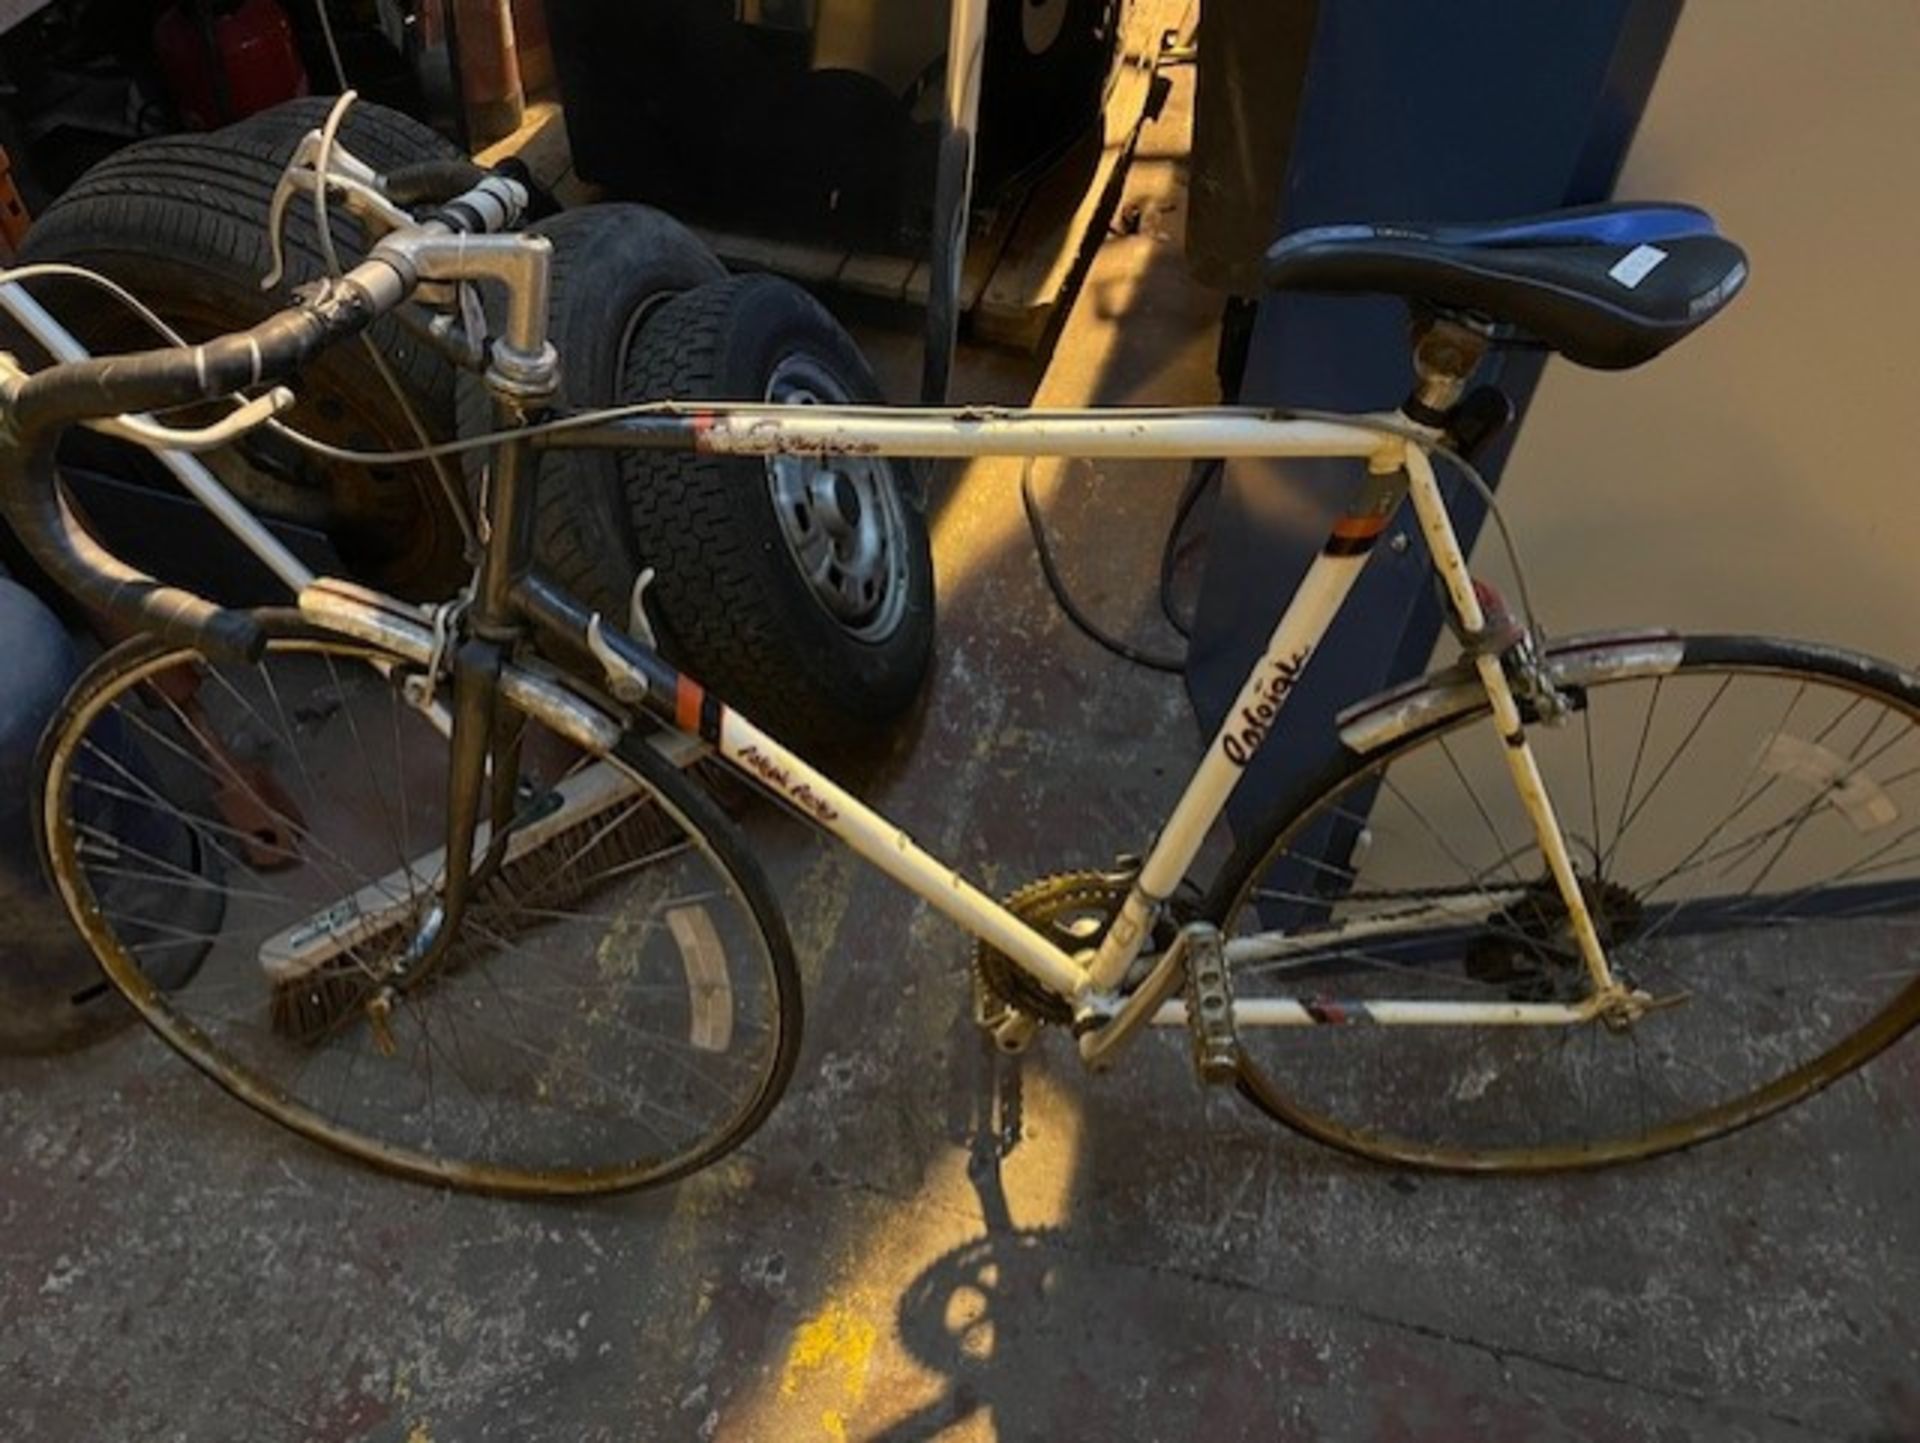 Men’s Raleigh equise racing bike 80s model thin wheels very light for its era - Image 2 of 2